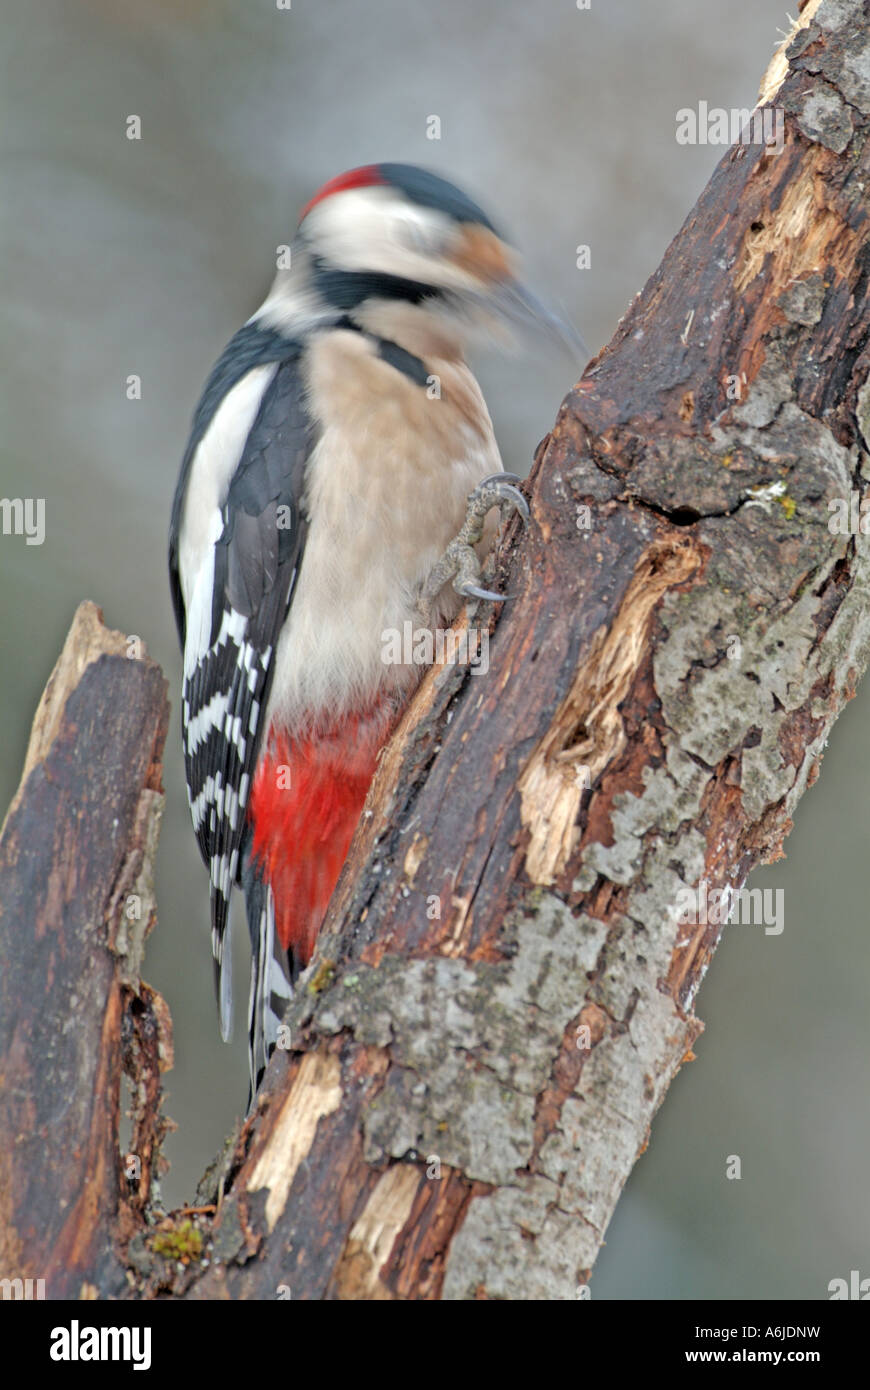 Great Spotted Woodpecker (Picoides major, Dendrocopos major), hammering on tree trunk Stock Photo